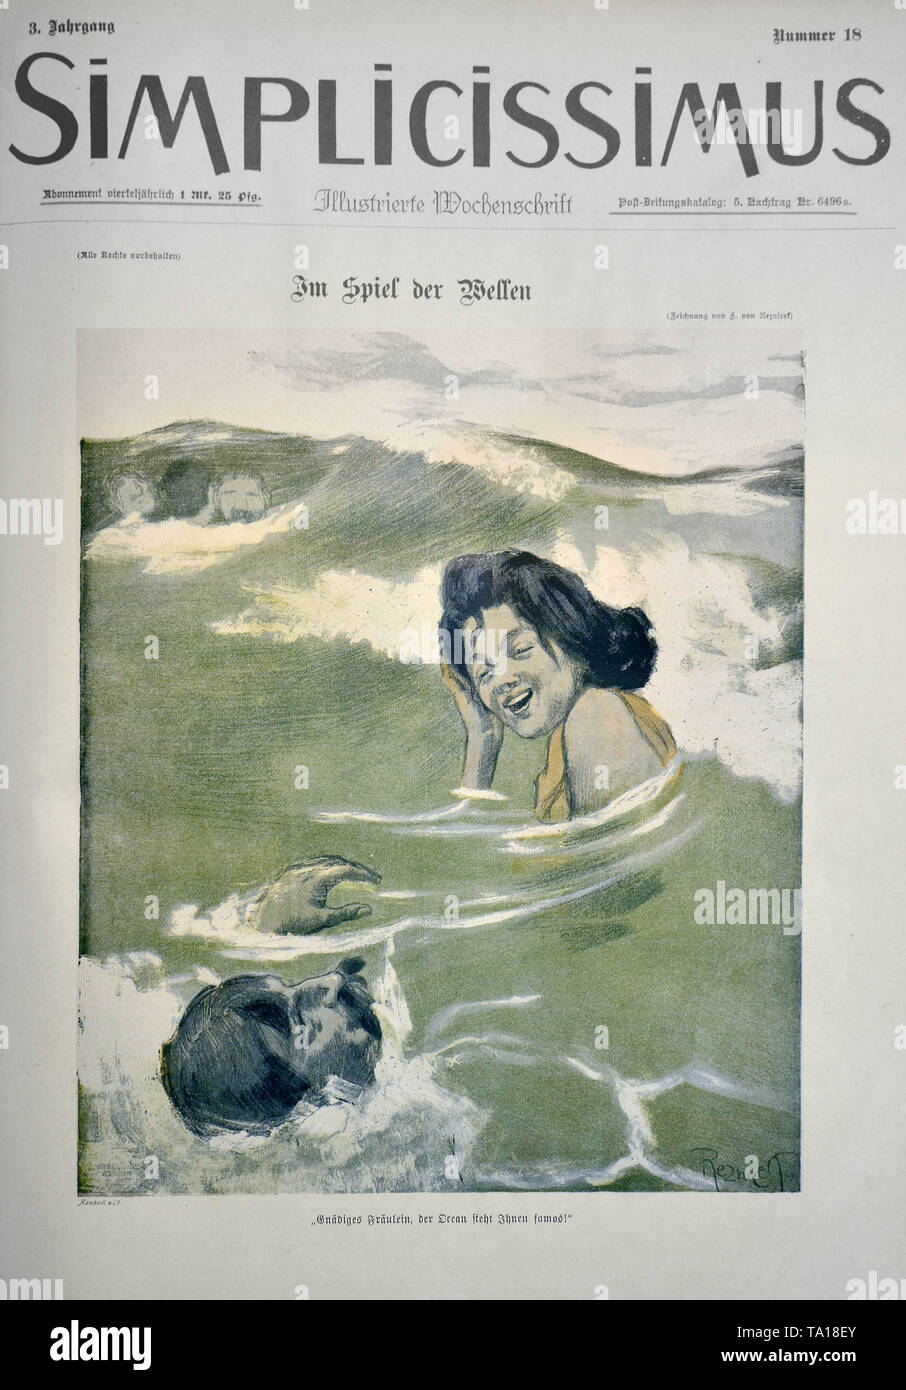 The drawing 'Im Spiel der Wellen' (The Play of the Waves) by Ferdinand von Reznicek. Caricature from the satirical magazine 'Simplicissimus', volume 3, issue no. 18 (1898). Under the picture it reads: 'Mademoiselle, the ocean suits you wonderfully'. Stock Photo